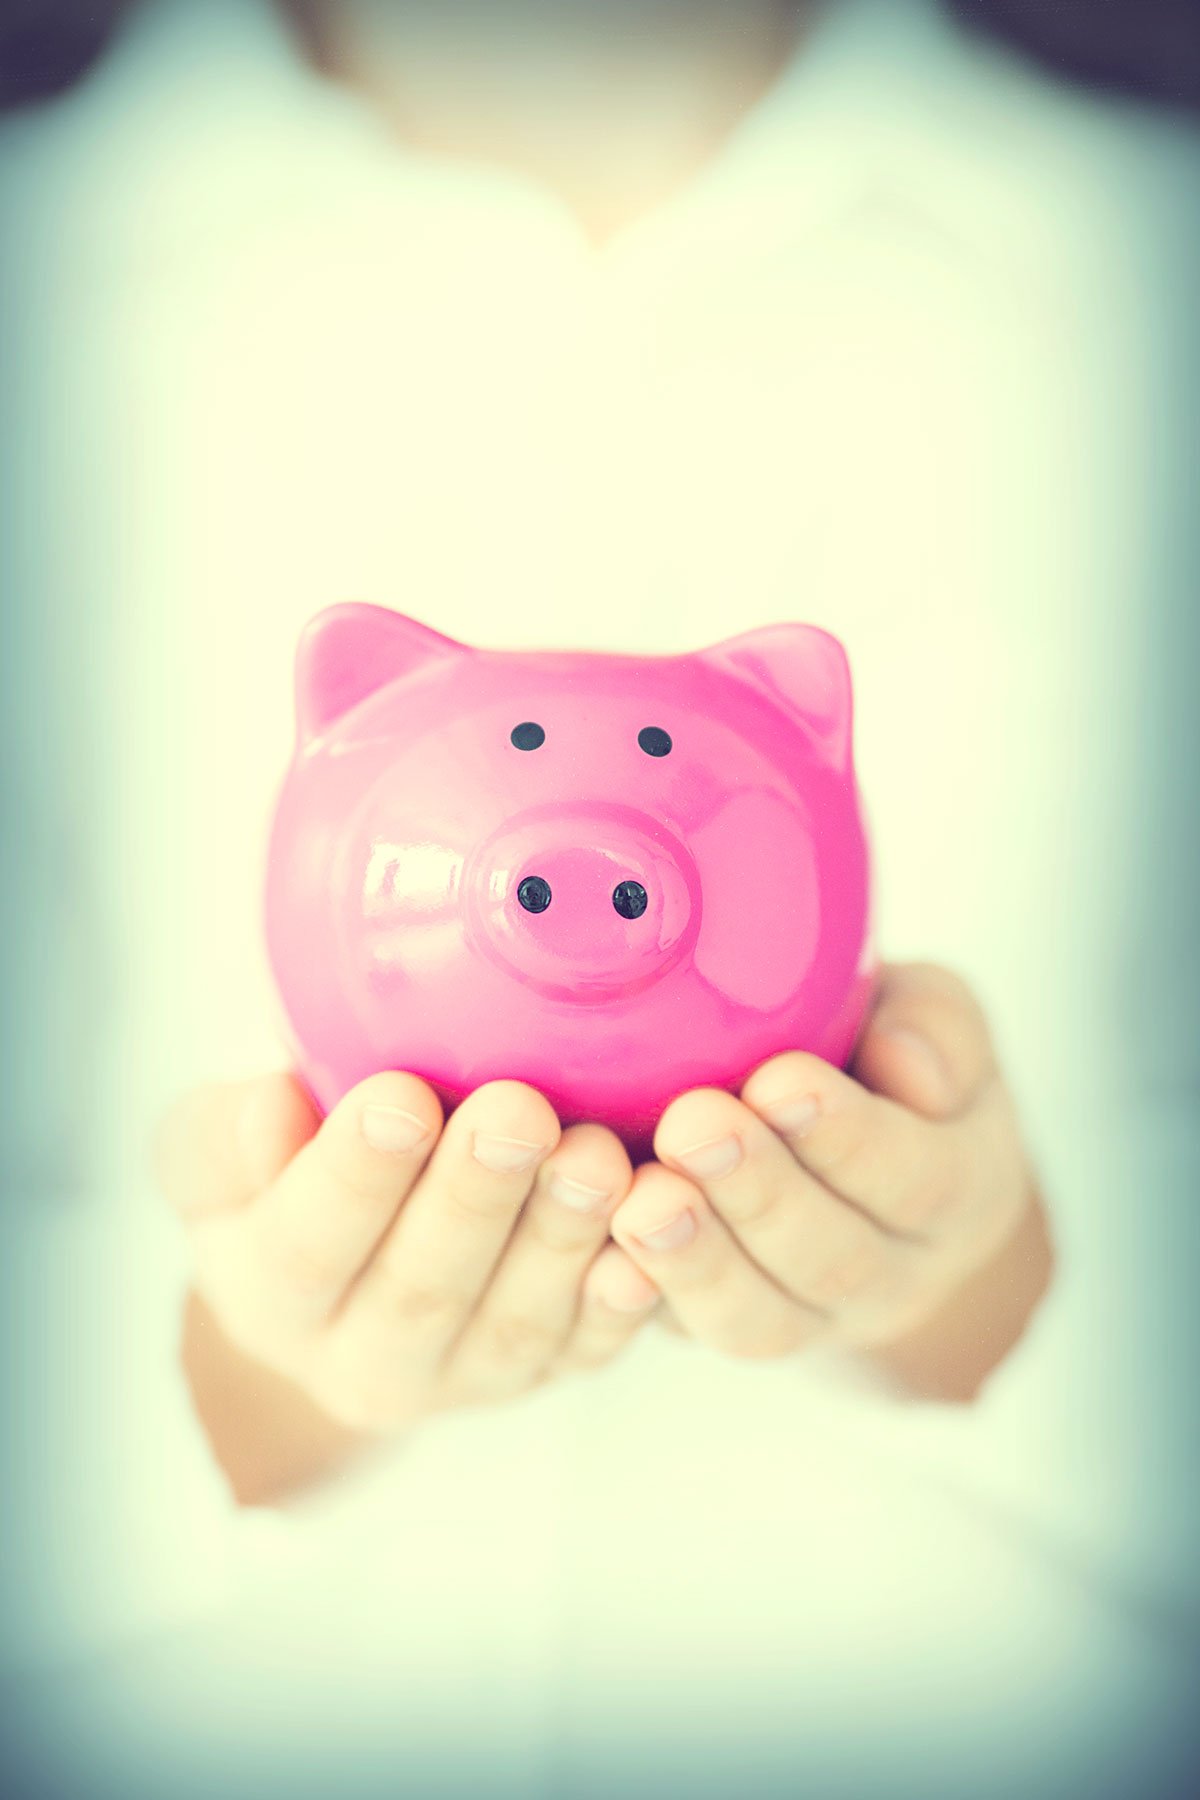 Image of a person's hands holding a piggy bank